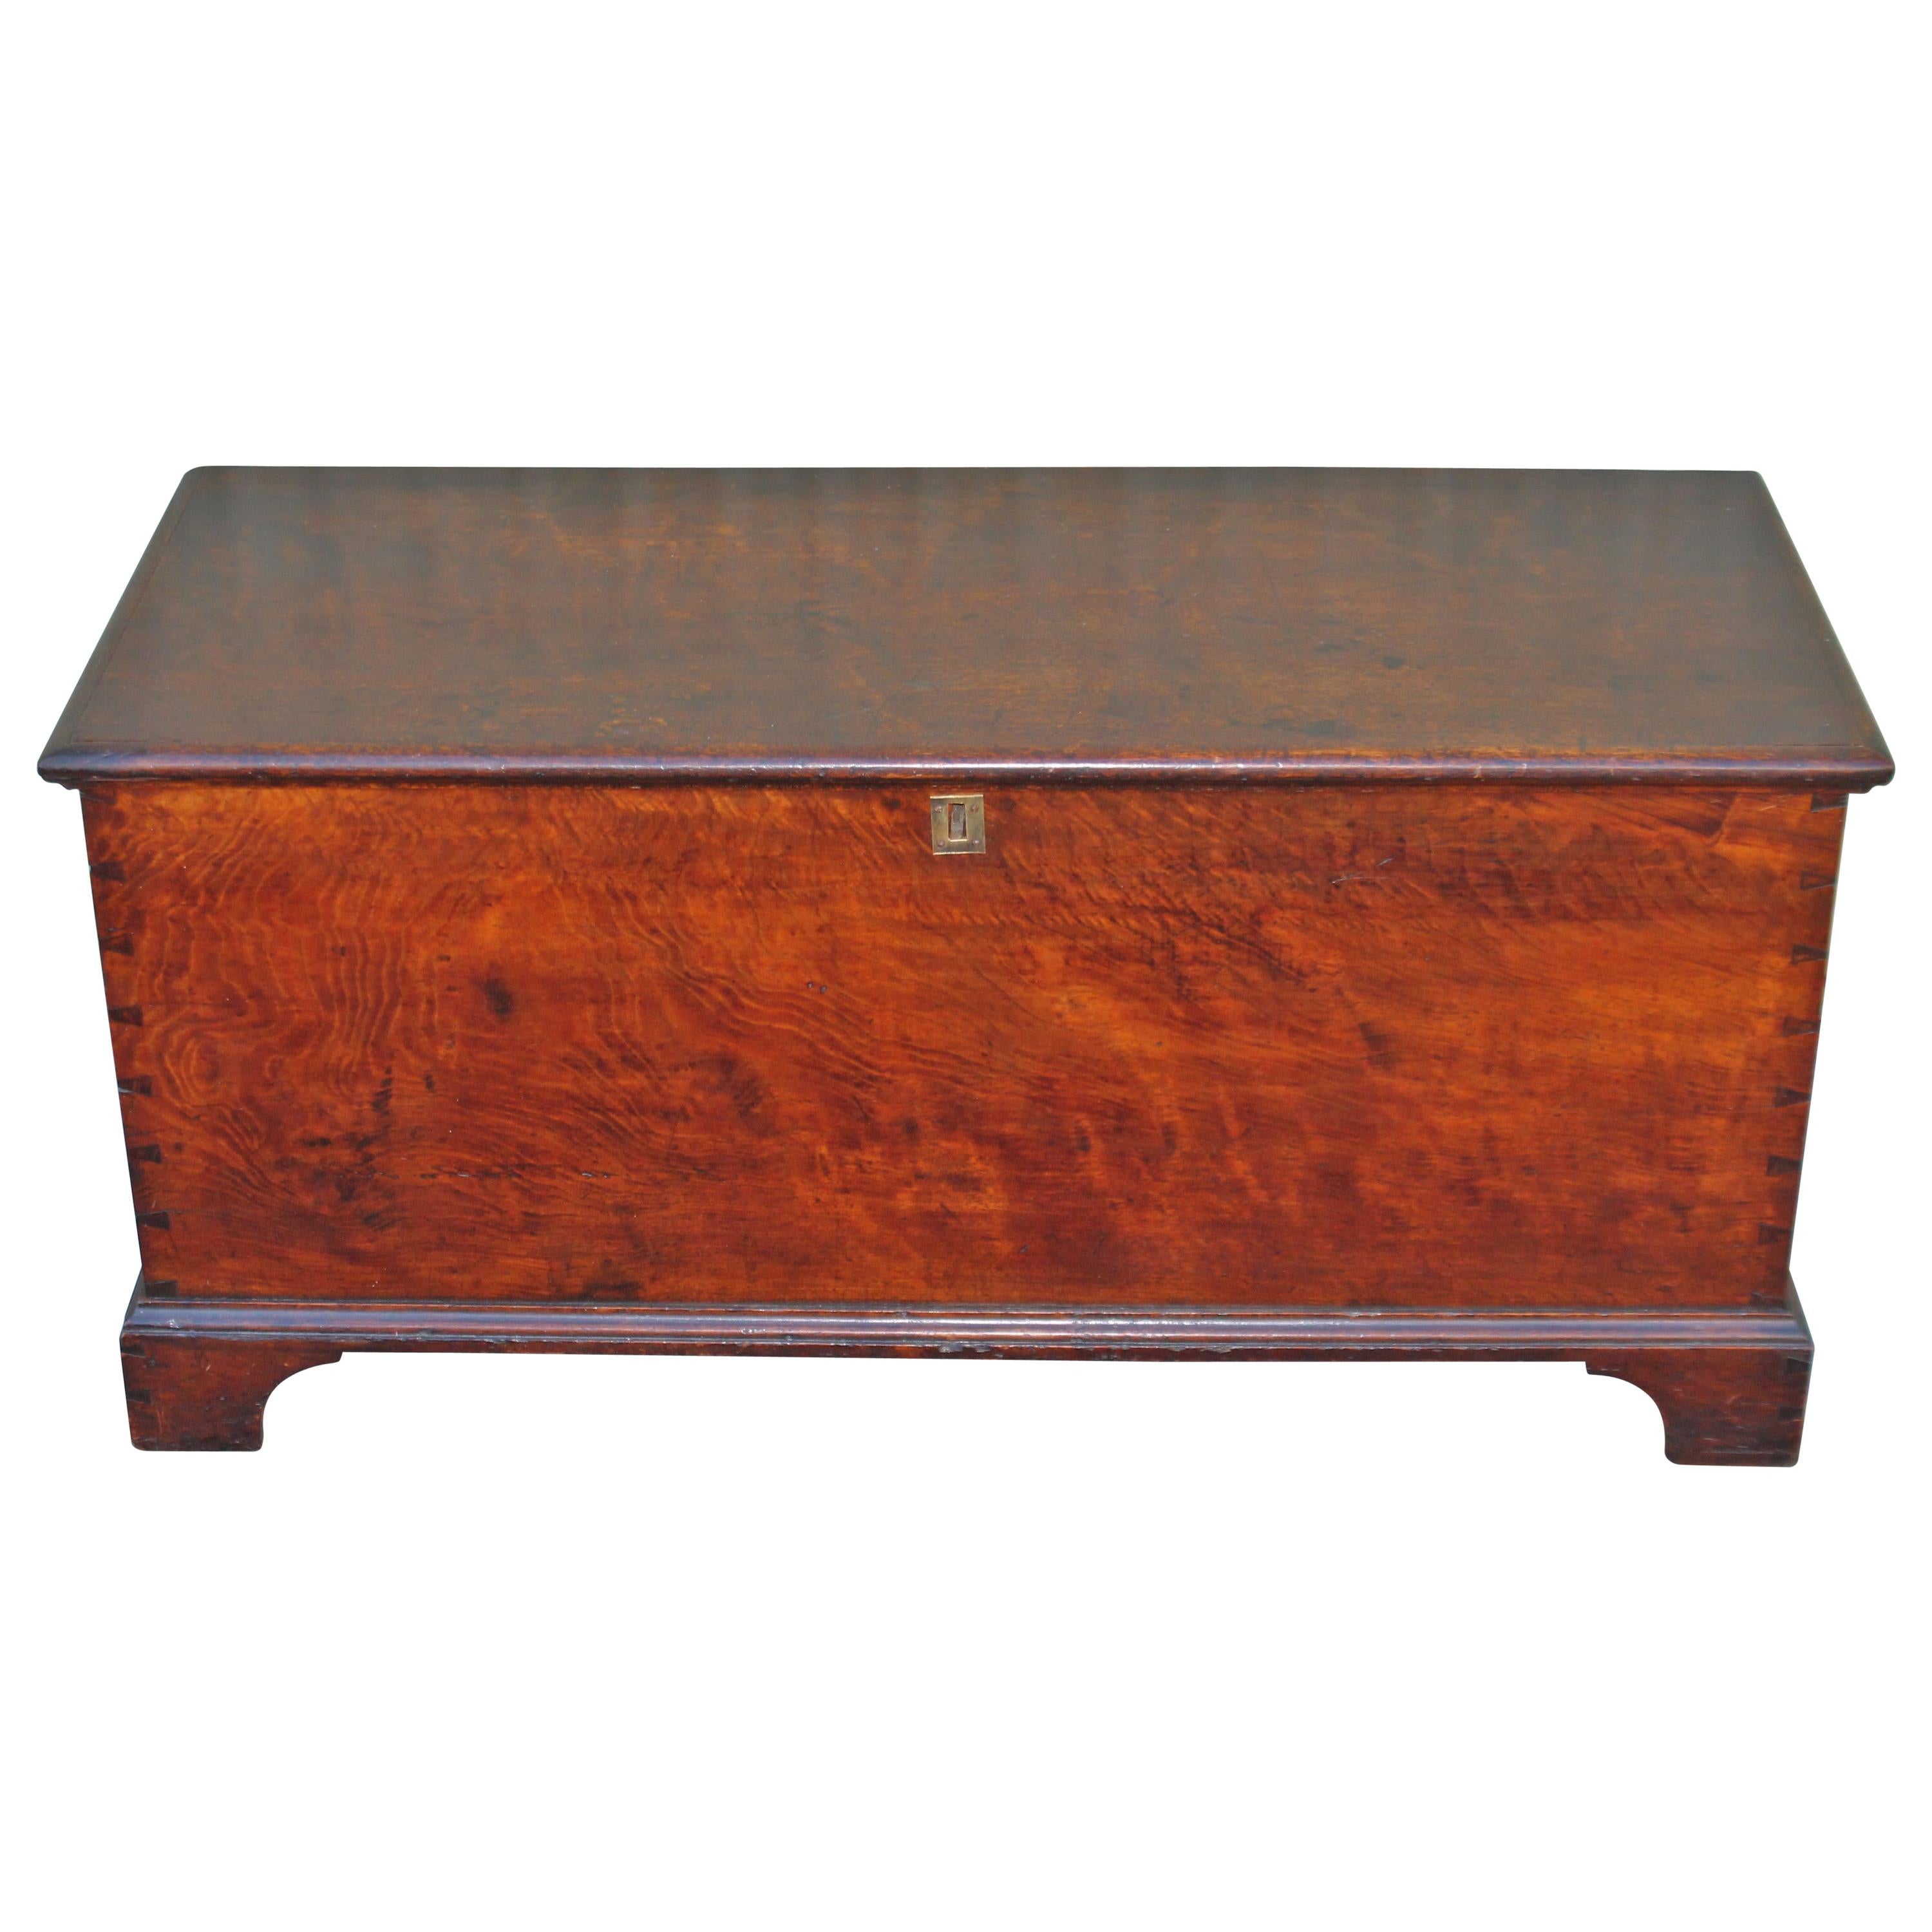 19th Century Blanket Chest in Walnut from Pennsylvania